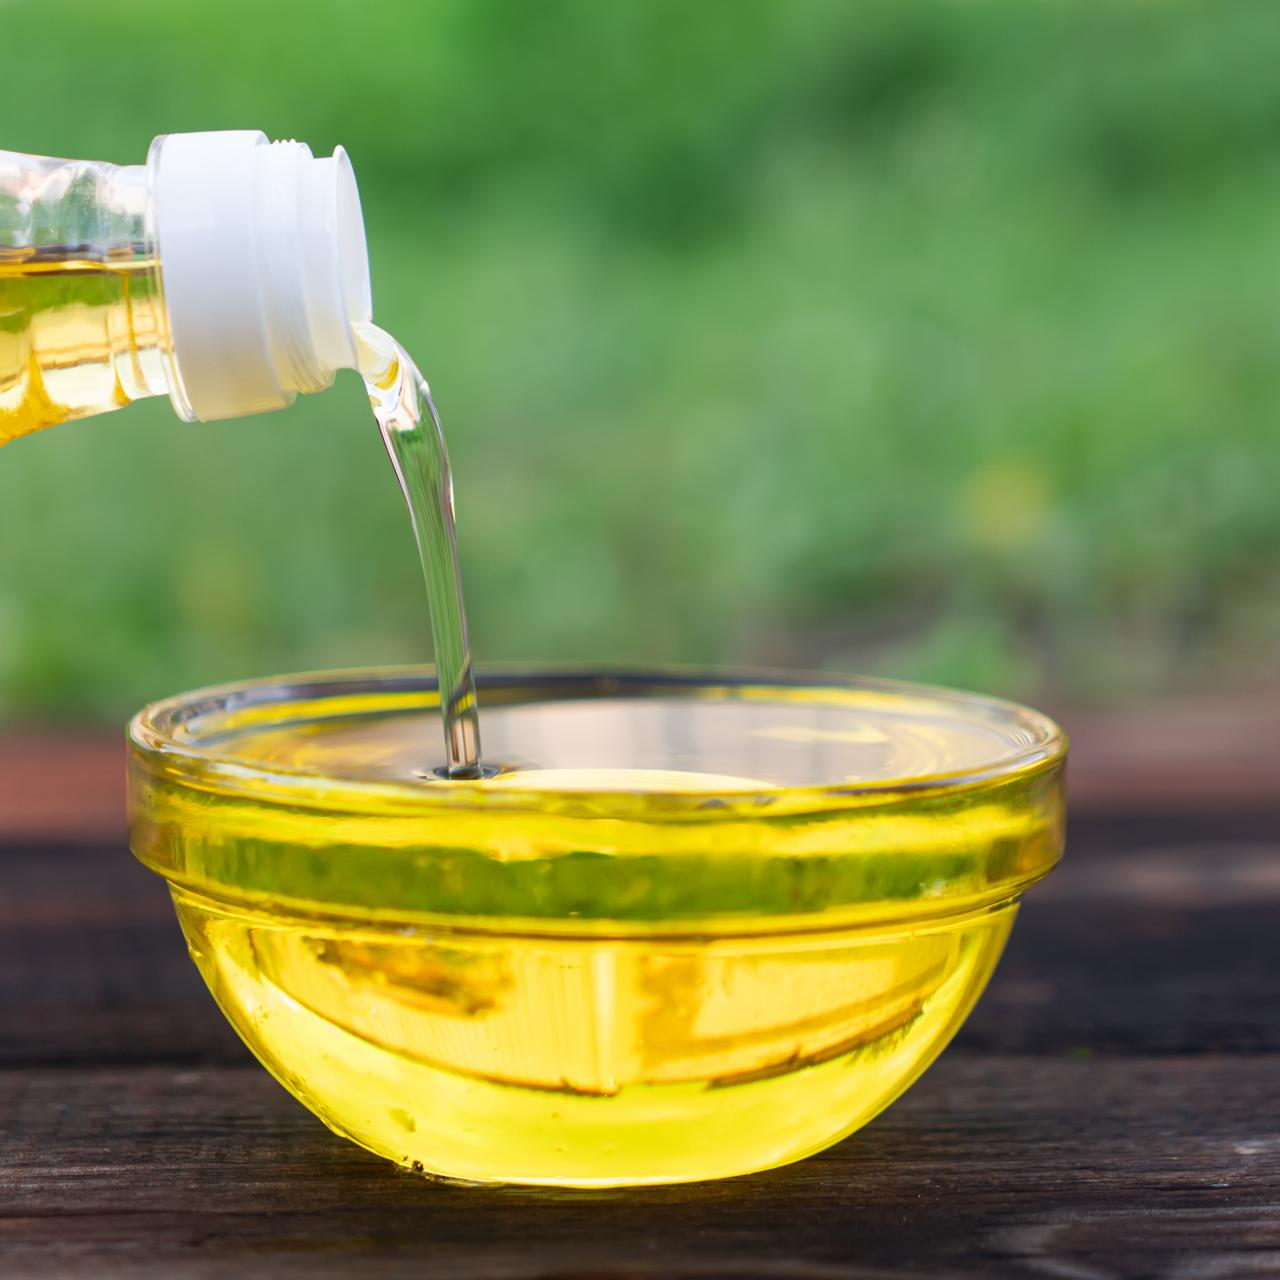 Soybean vs Canola Oil: A Battle of Cooking Oils